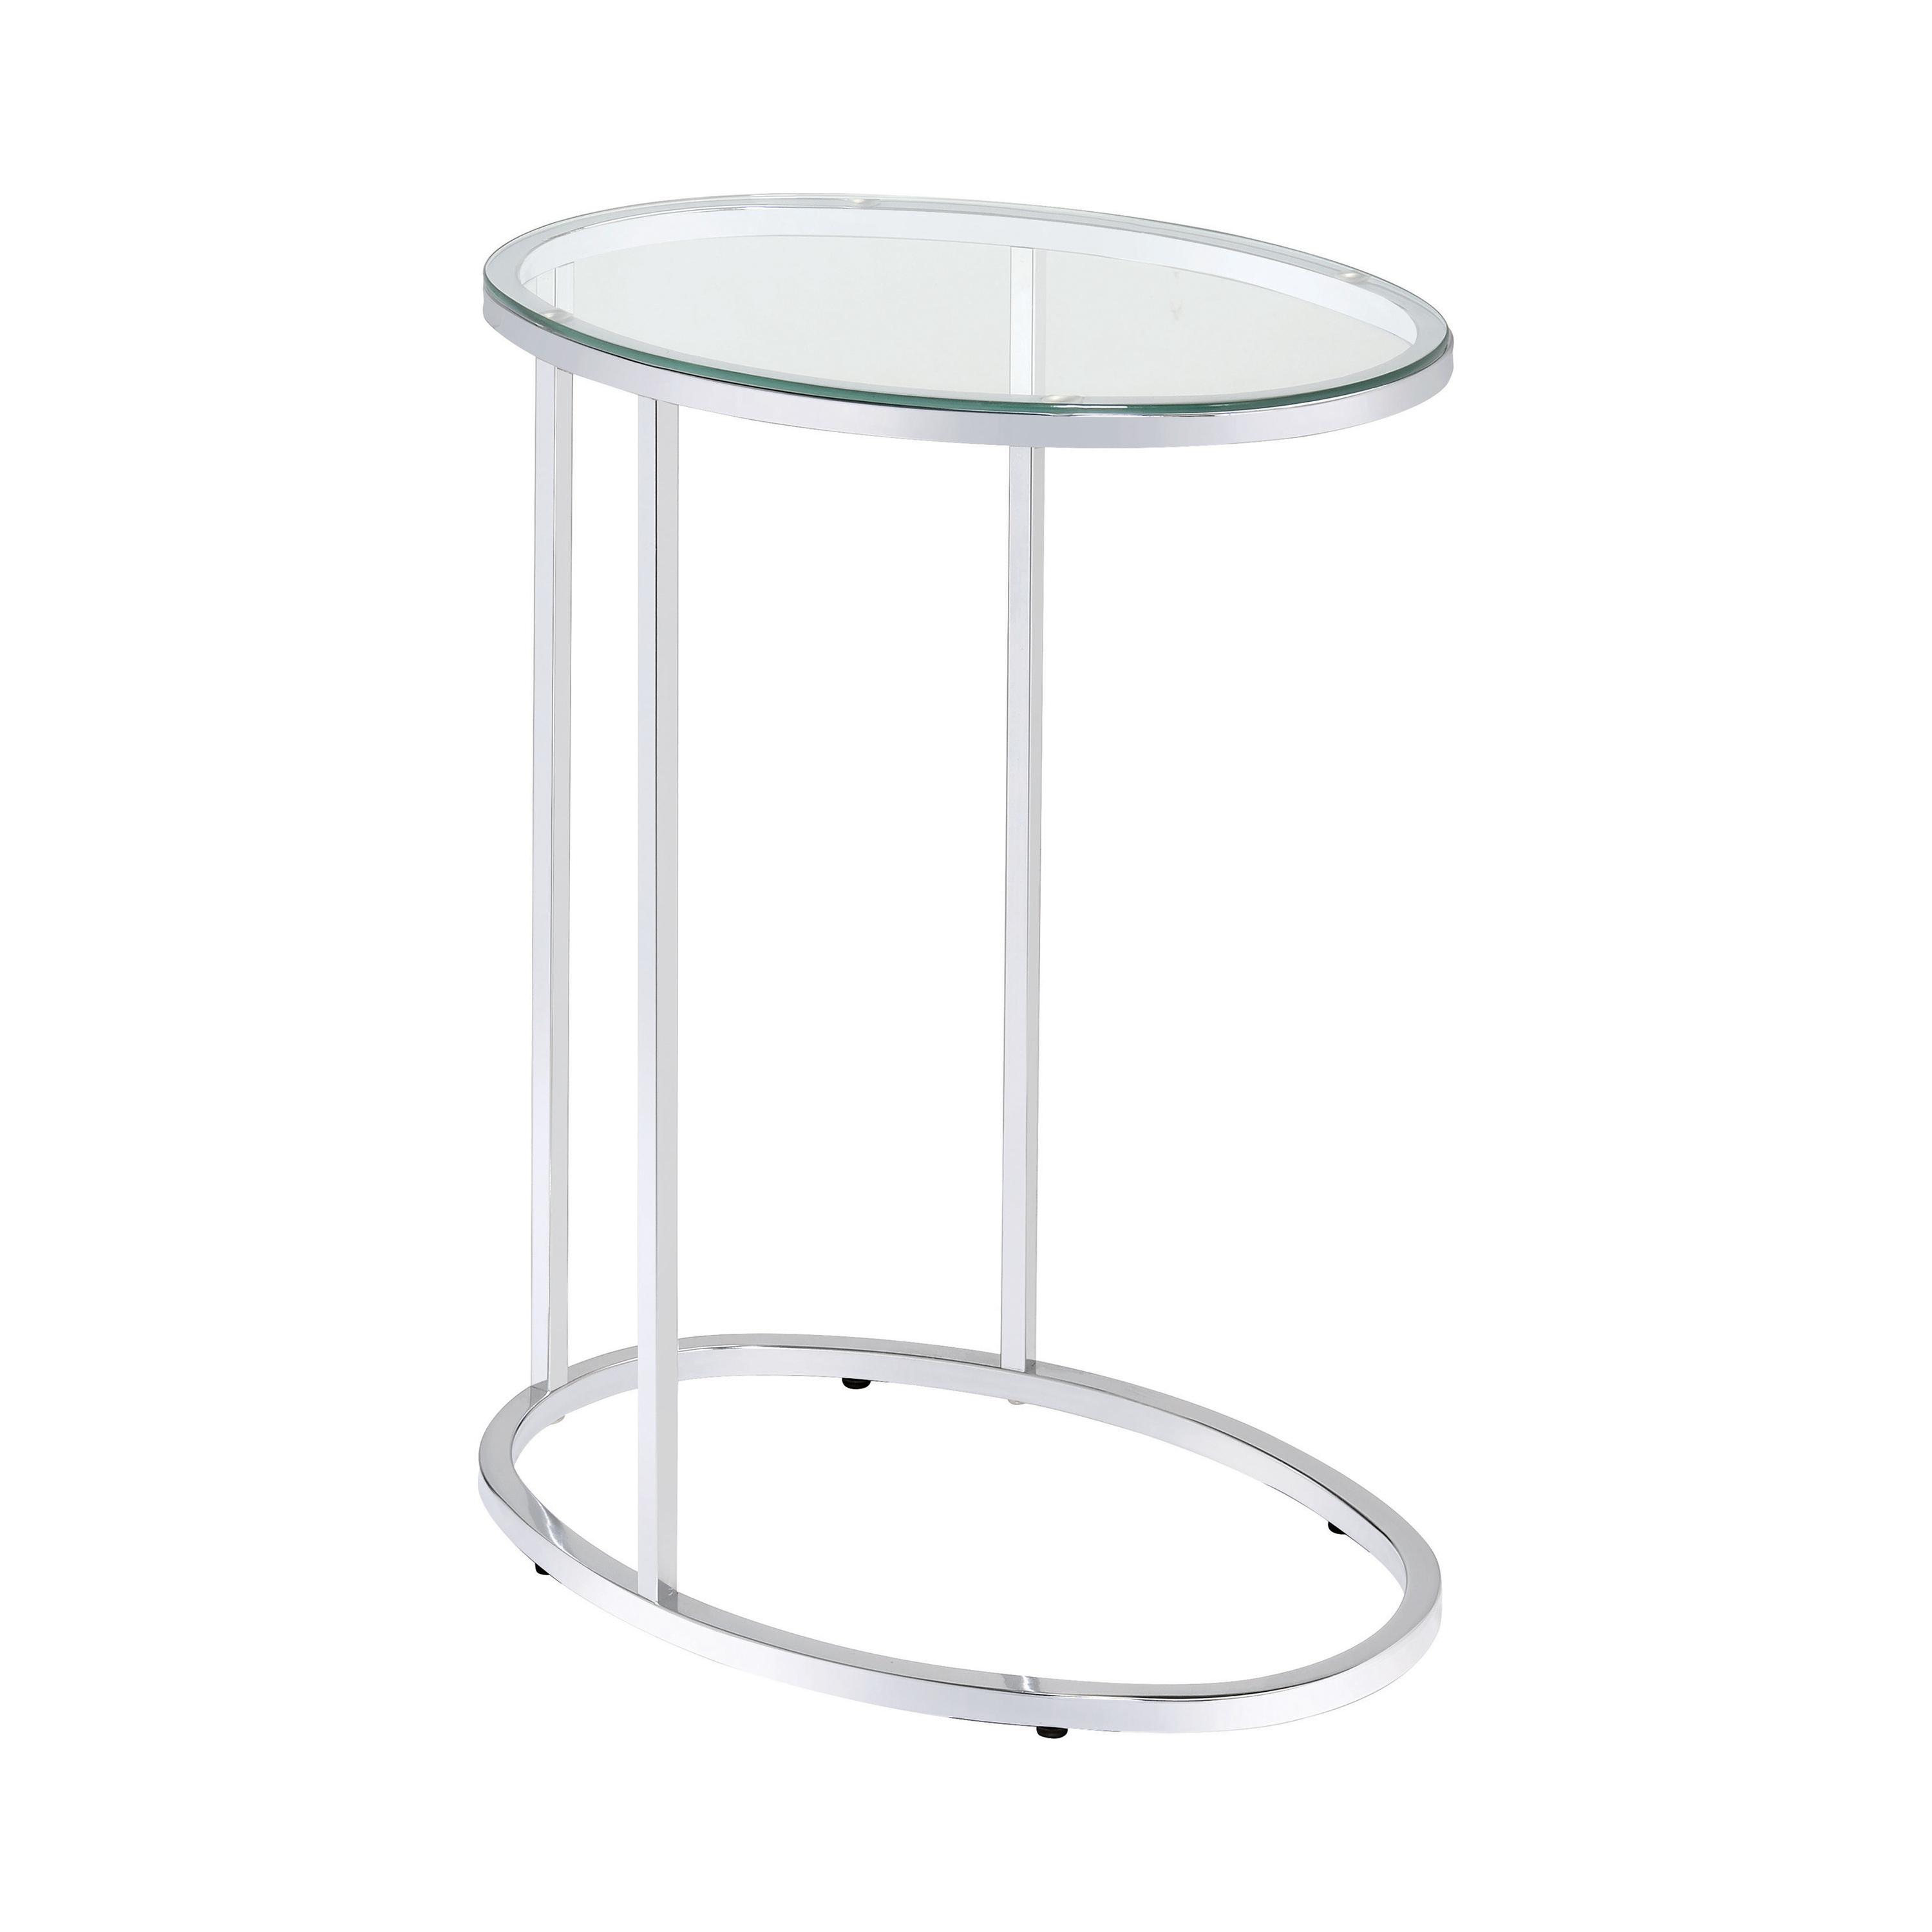 Modern Snack Table 902927 902927 in Chrome 